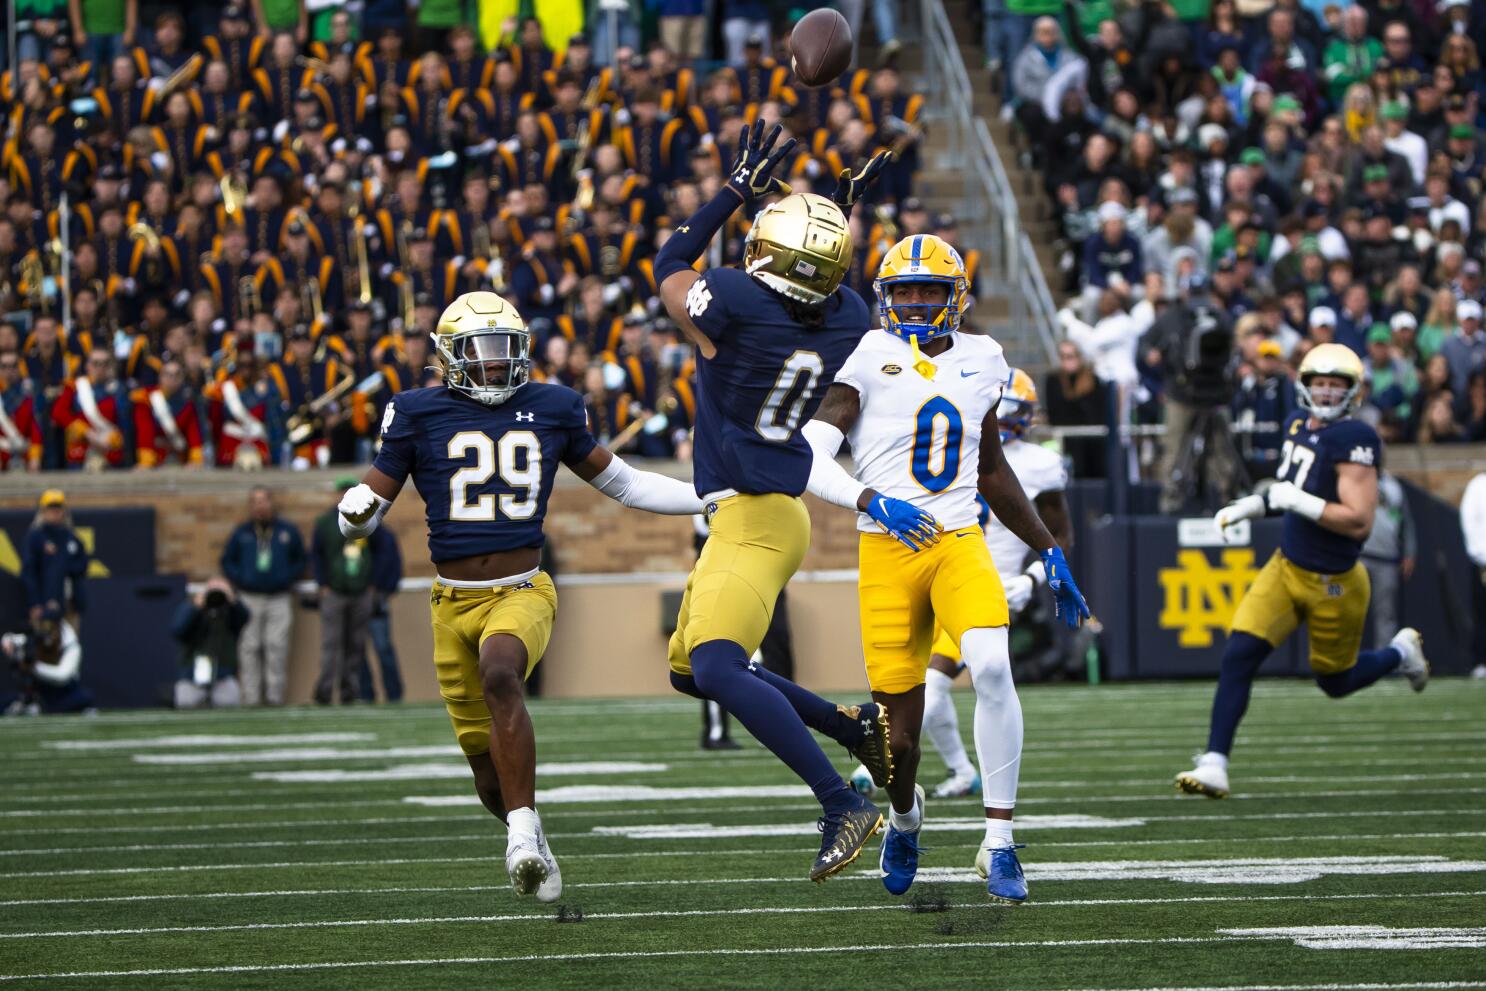 Takeaways: Pitt Showed Signs of Life in Upset of No. 14 Louisville